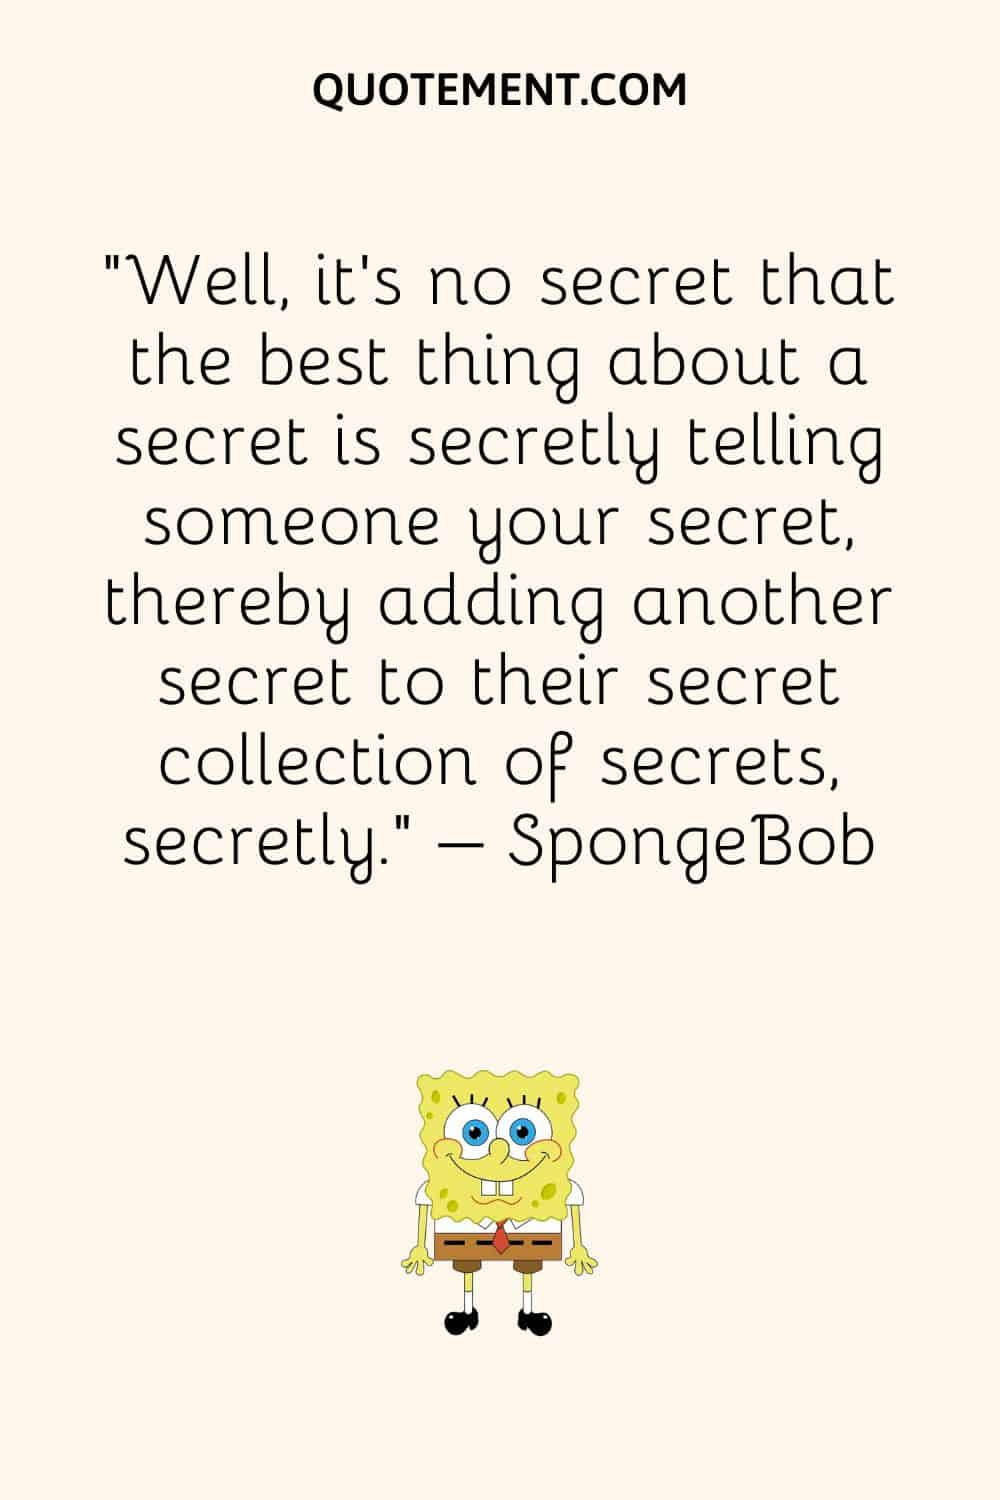 “Well, it’s no secret that the best thing about a secret is secretly telling someone your secret, thereby adding another secret to their secret collection of secrets, secretly.” – SpongeBob